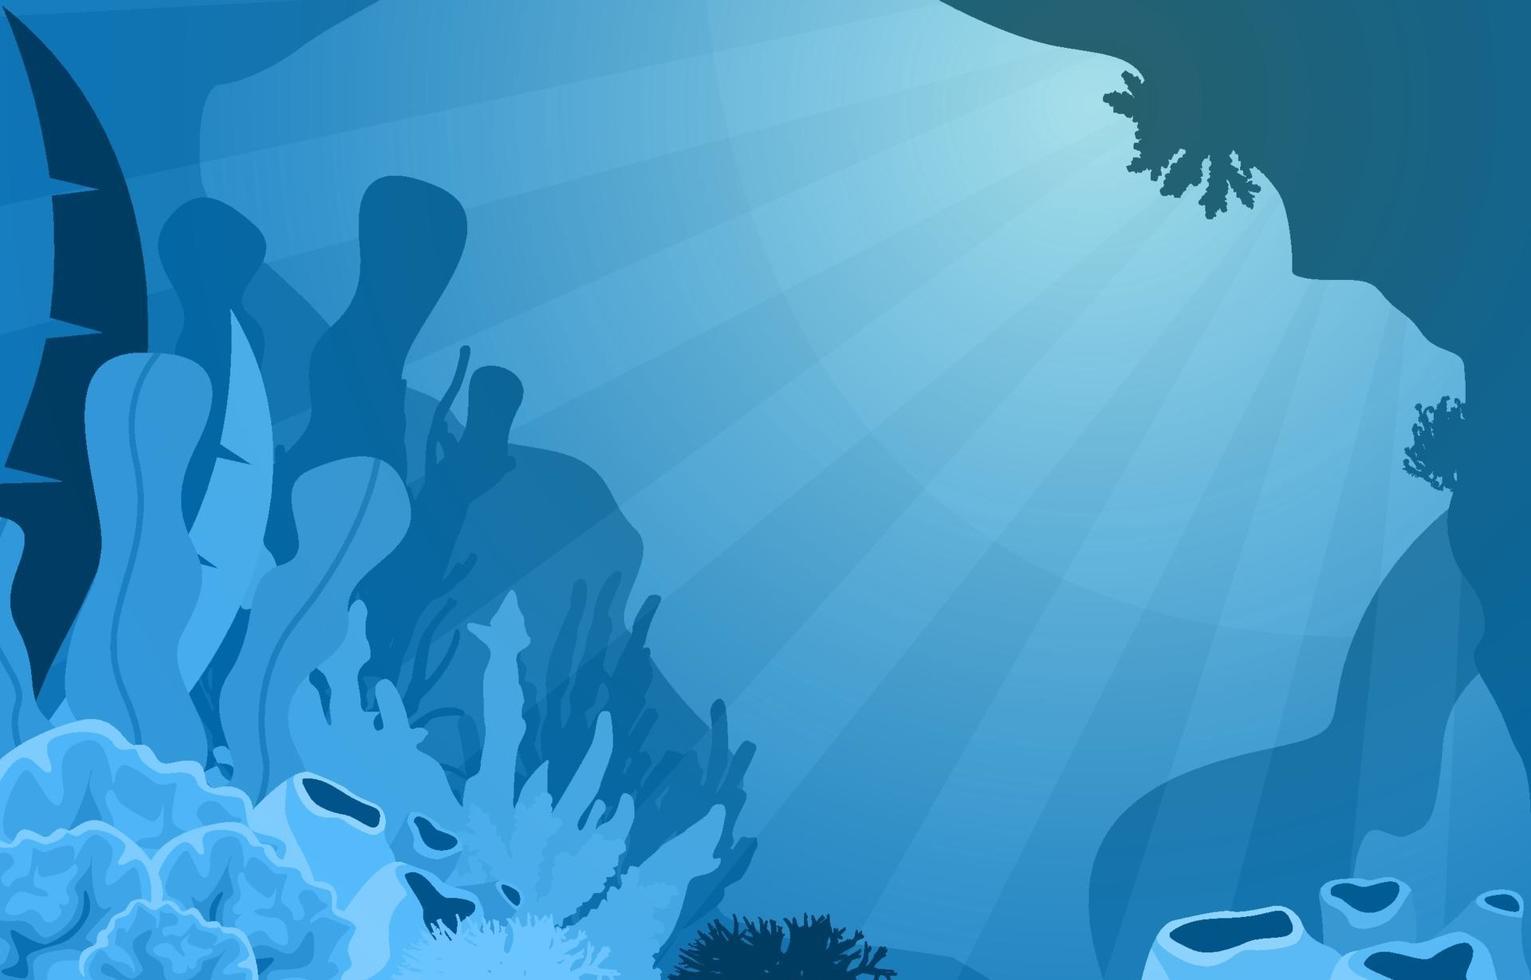 Underwater Scene with Coral Reef Illustration vector